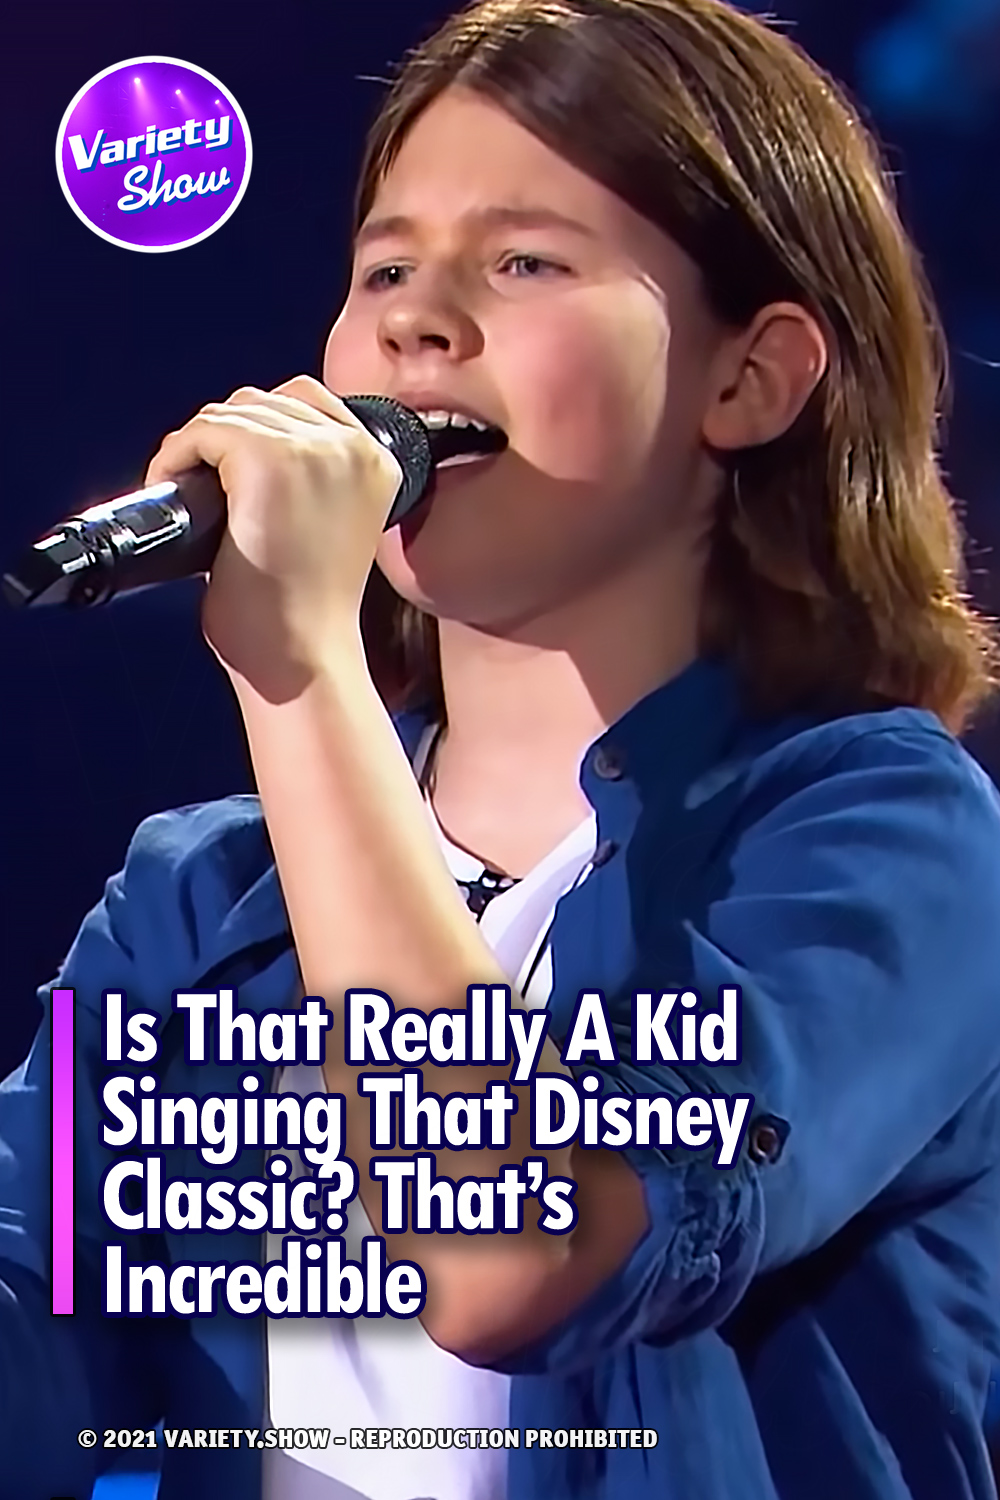 Is That Really A Kid Singing That Disney Classic? That’s Incredible